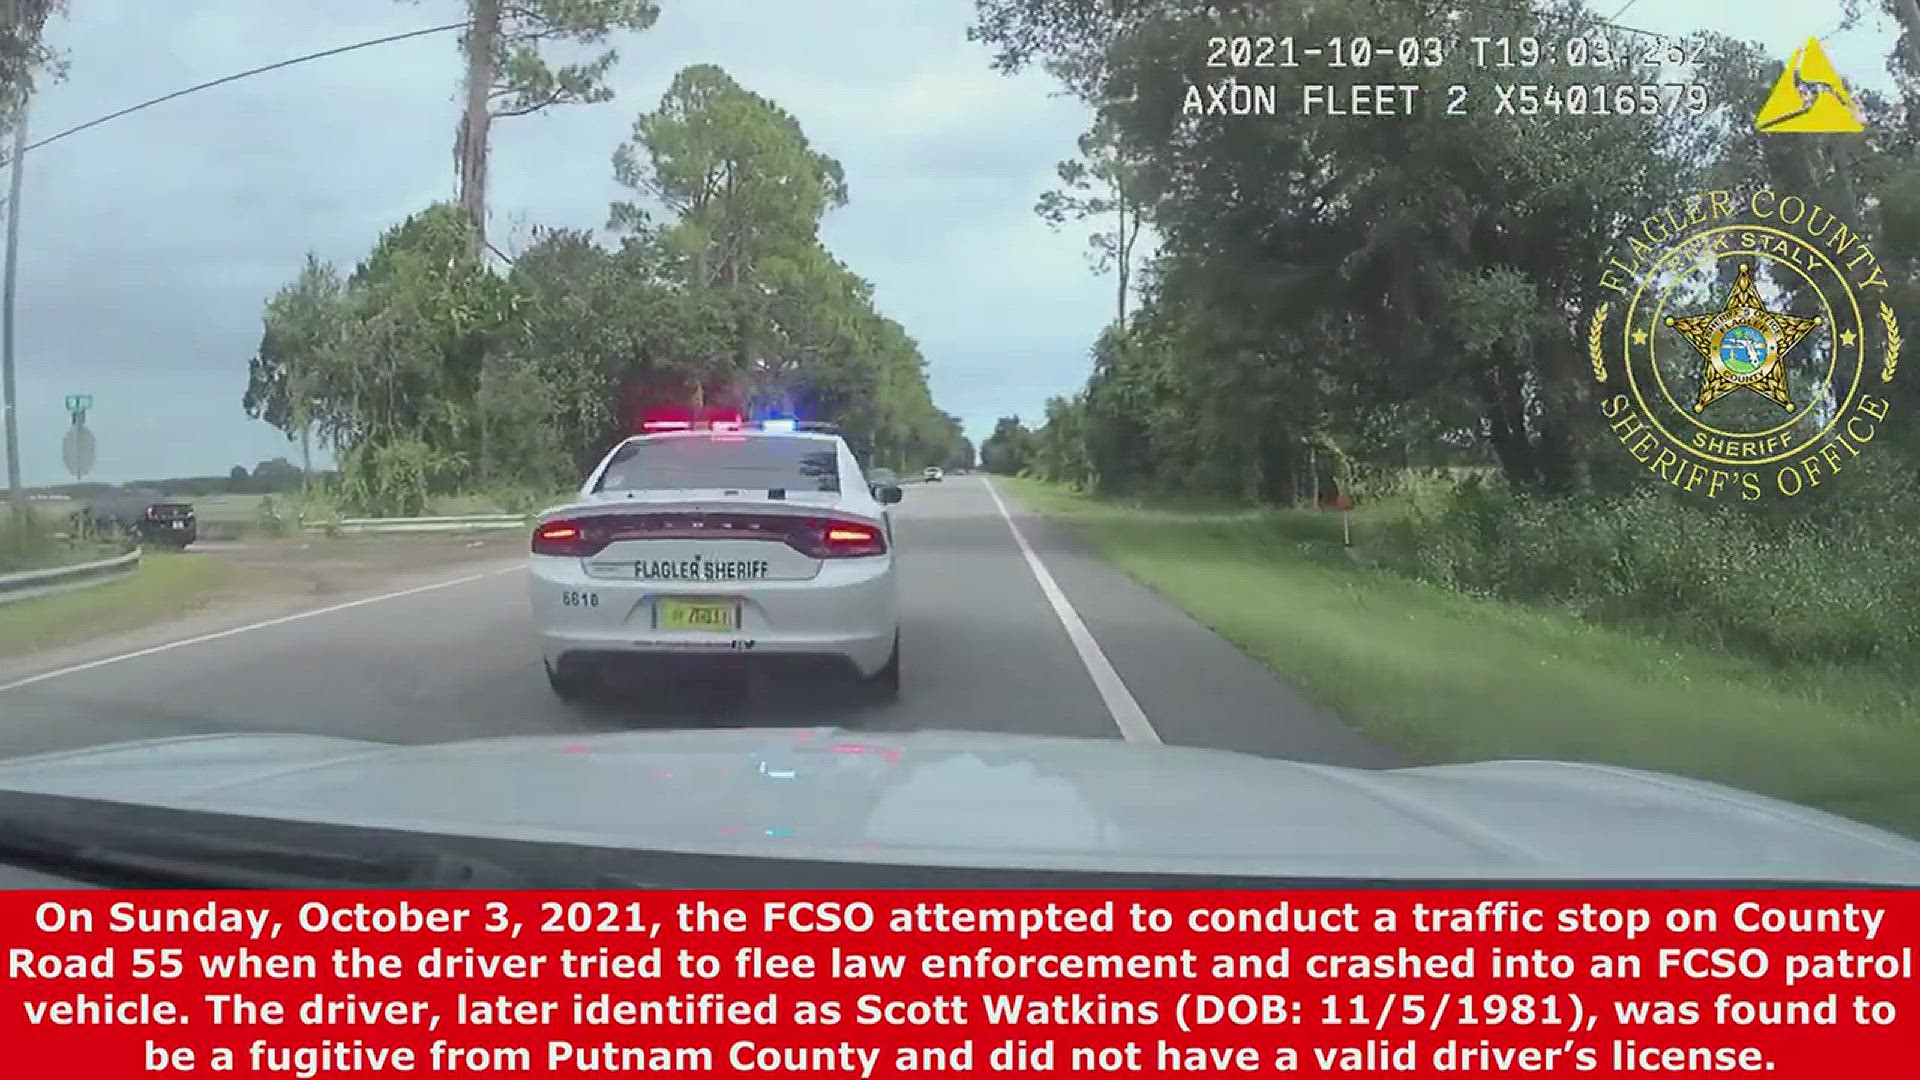 The video caption was provided by the Flagler County Sheriff’s Office.